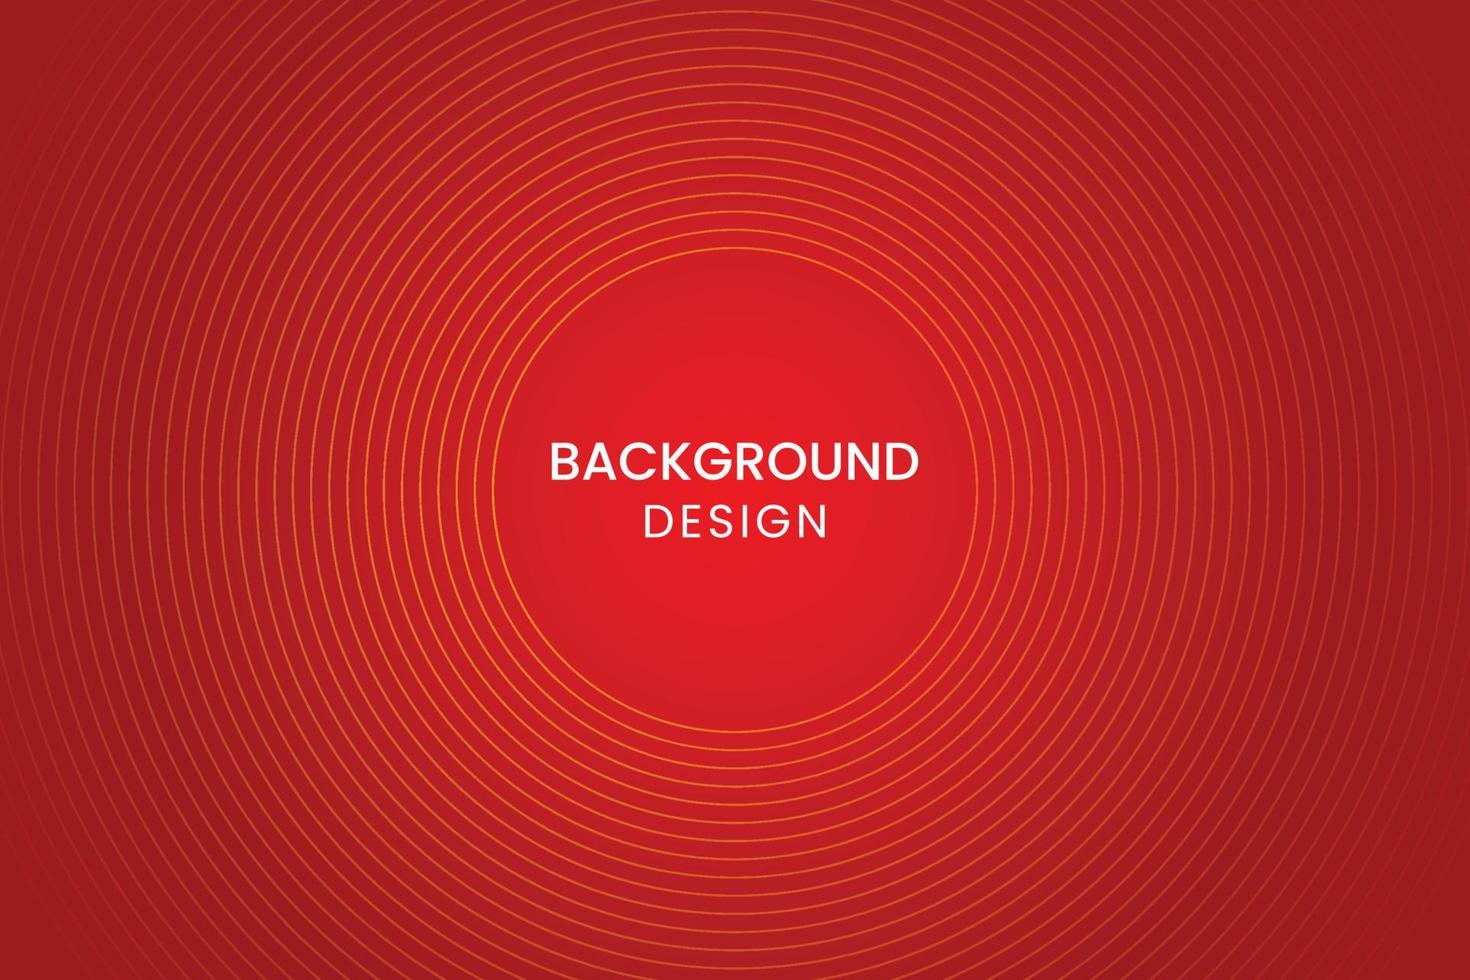 Simple abstract red background with circular lines. vector